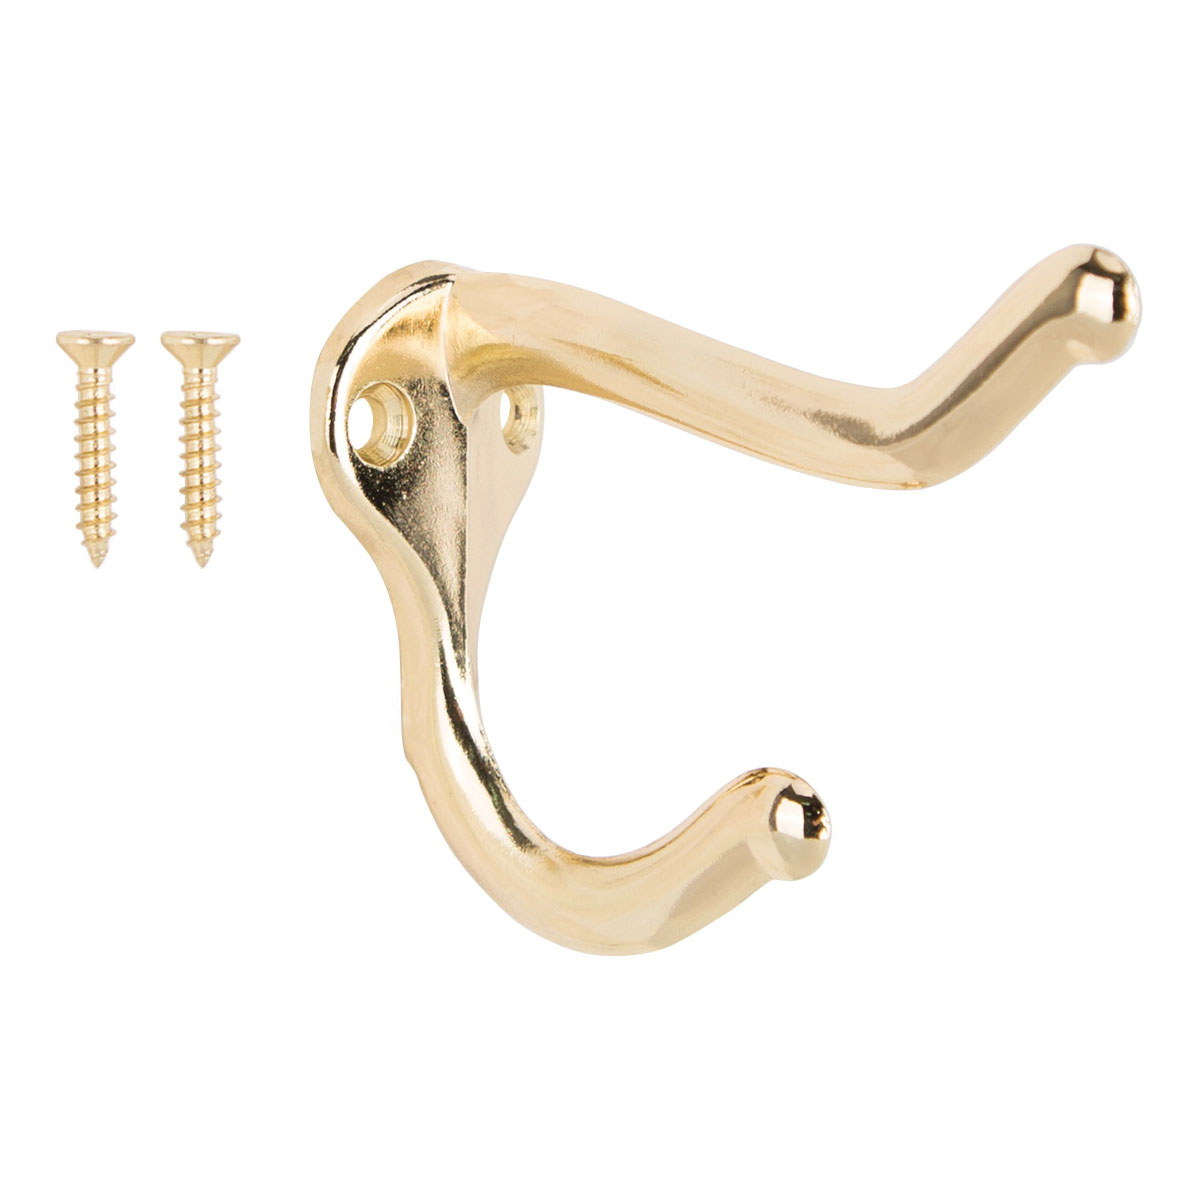 H62-B070 Coat and Hat Hook, 22 lb, 2-Hook, 1 in Opening, Zinc, Brass